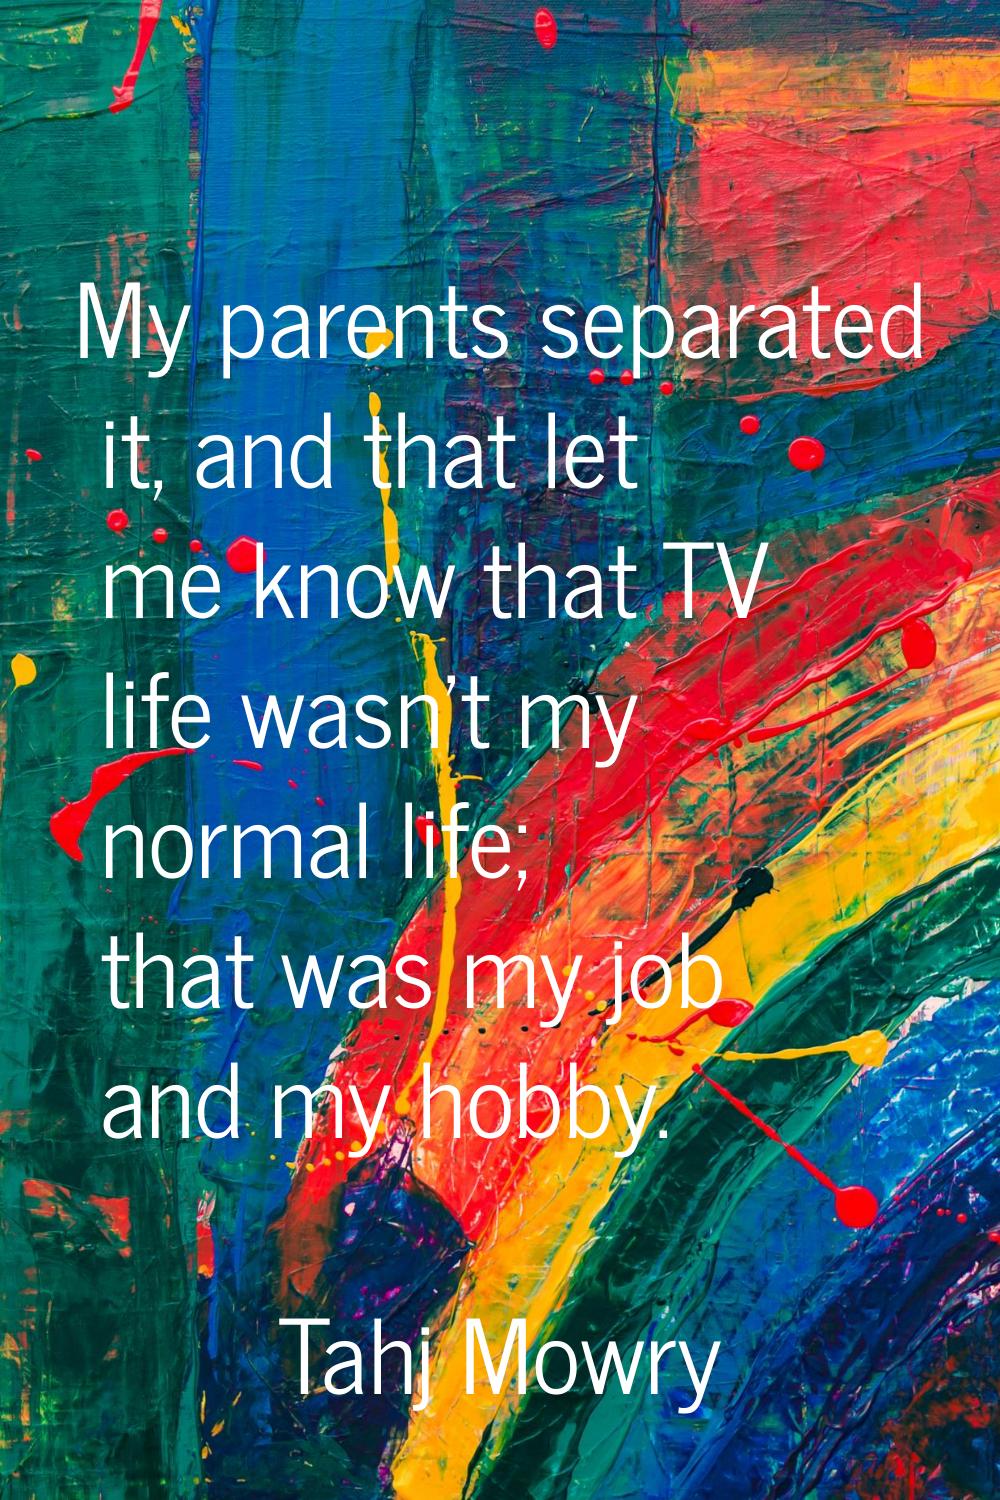 My parents separated it, and that let me know that TV life wasn't my normal life; that was my job a